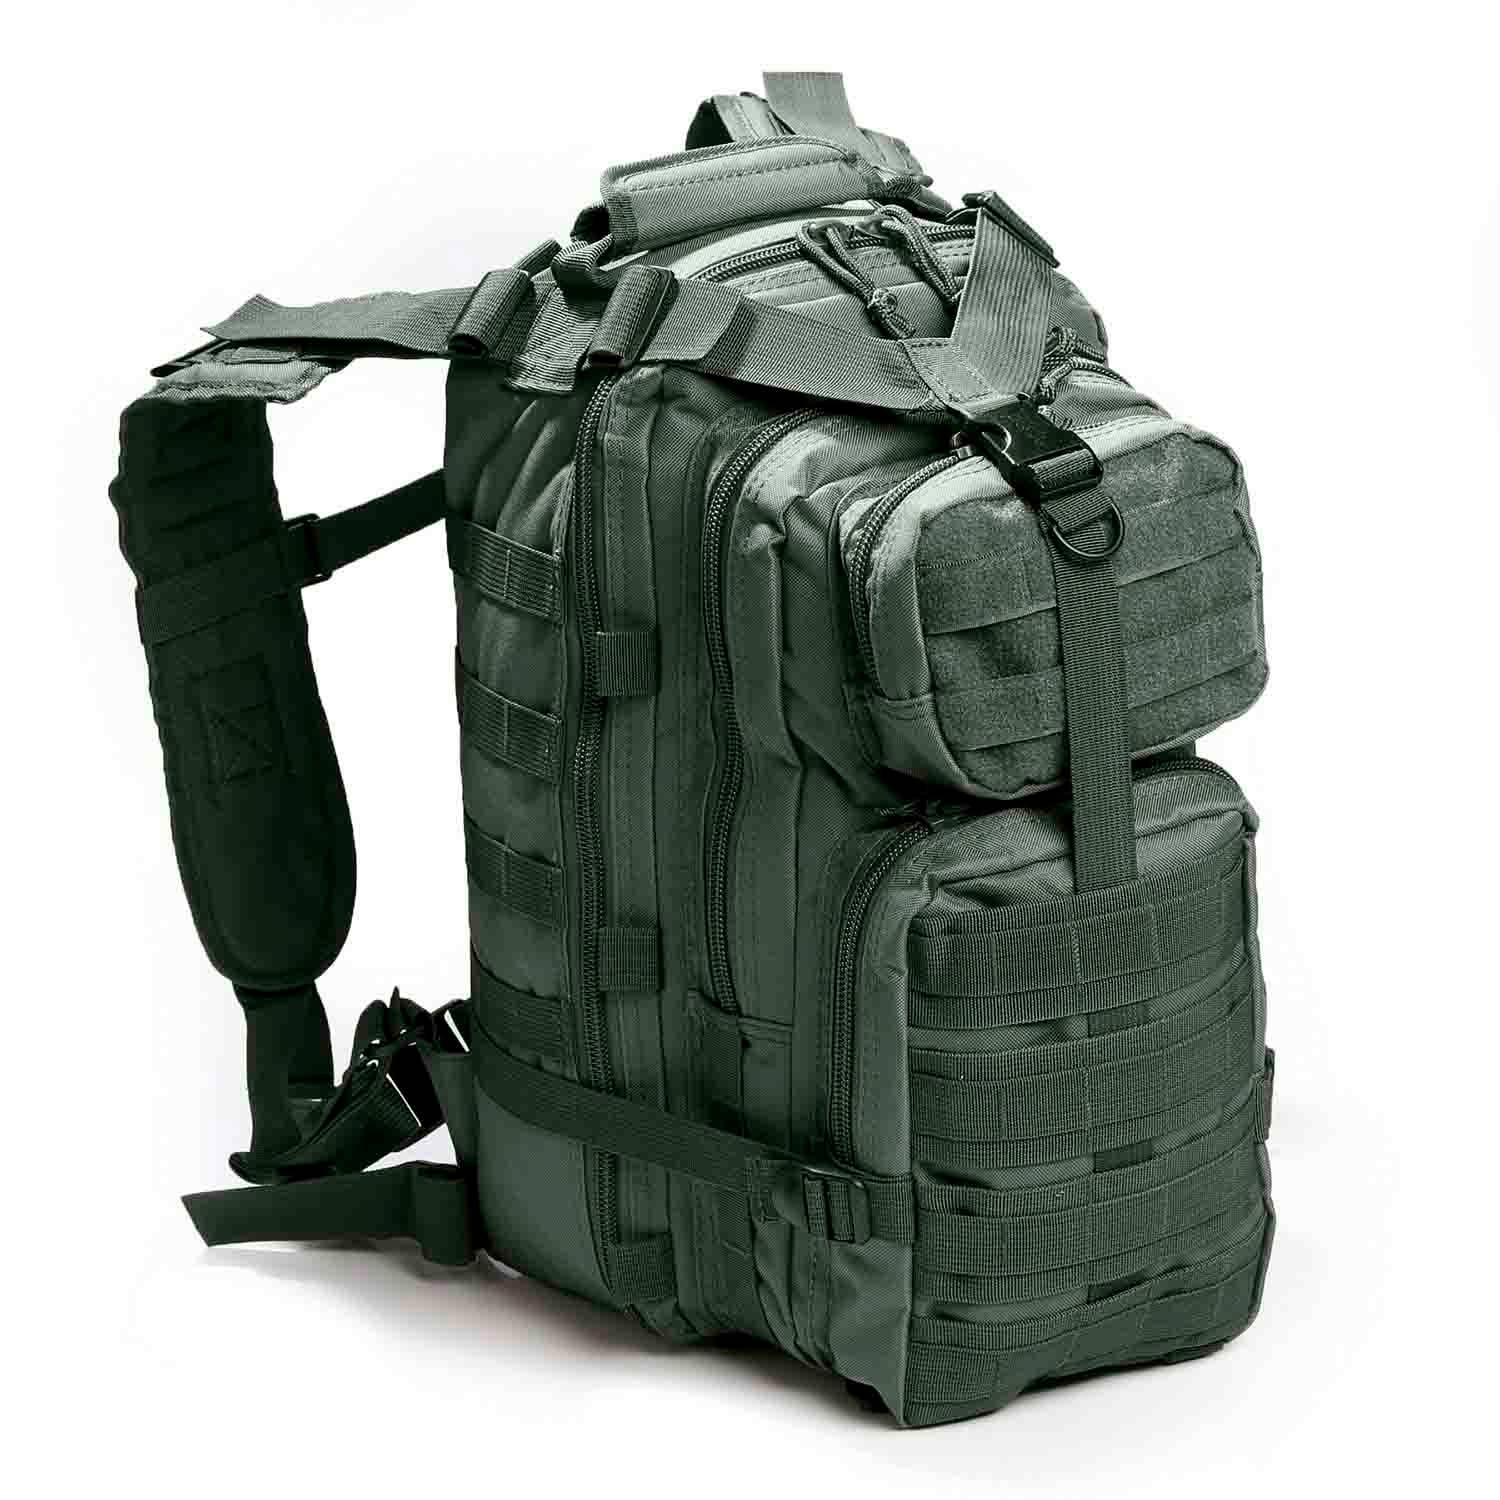 Galls Tactical Backpack | Backpack 2-Day MOLLE